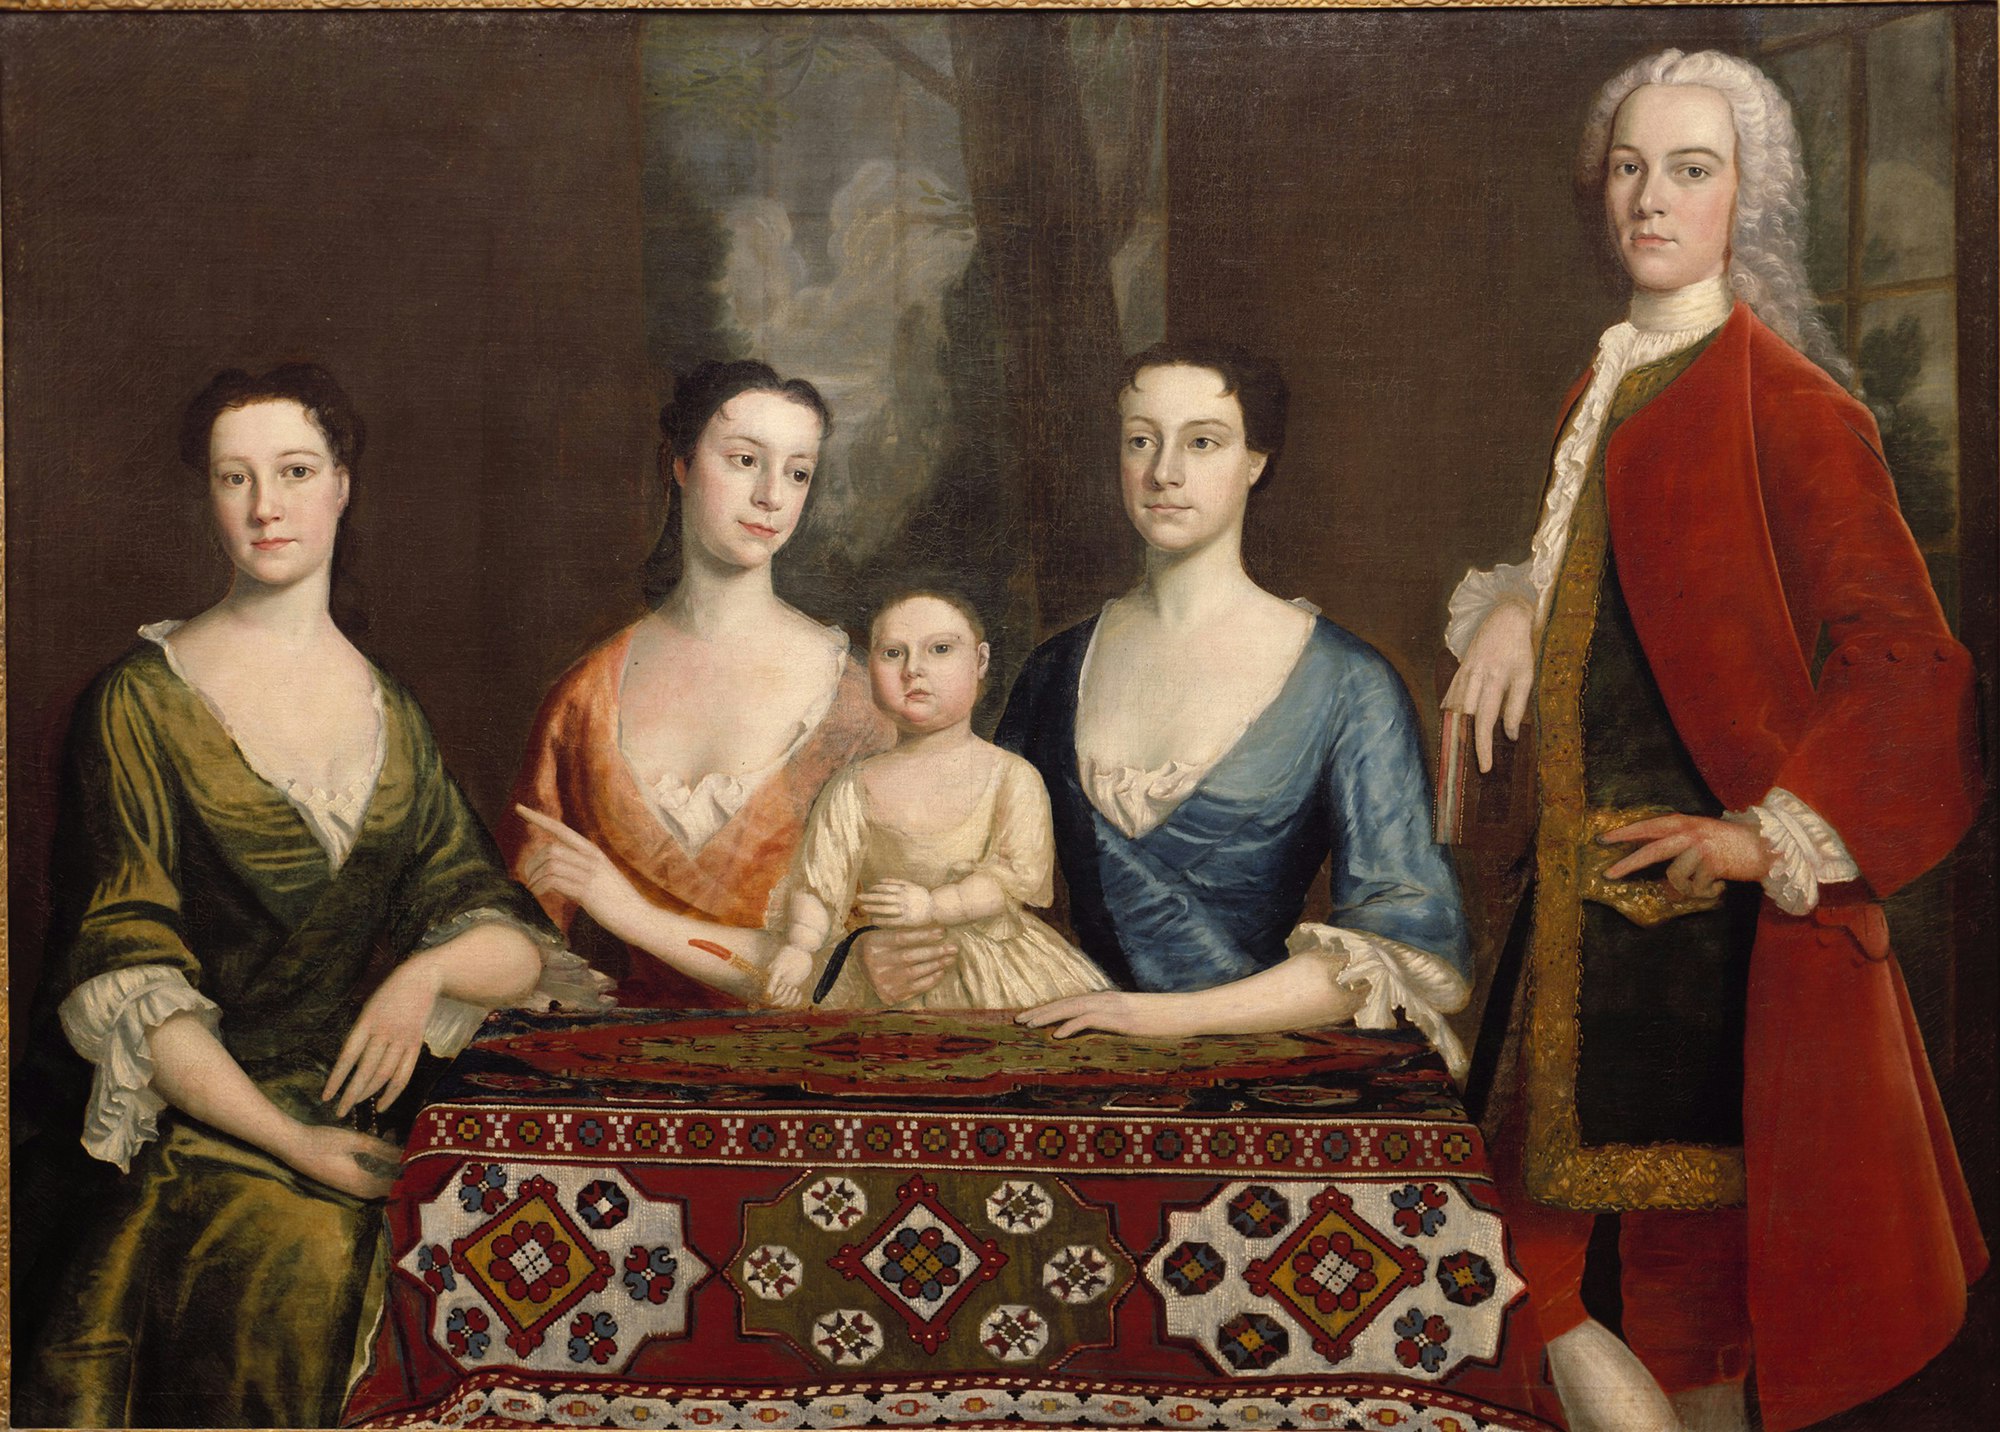 painting of Isaac Royall Jr., his wife, his wife's sister, Mary Palmer, his sister, Penelope Royall, and his daughter, Elizabeth